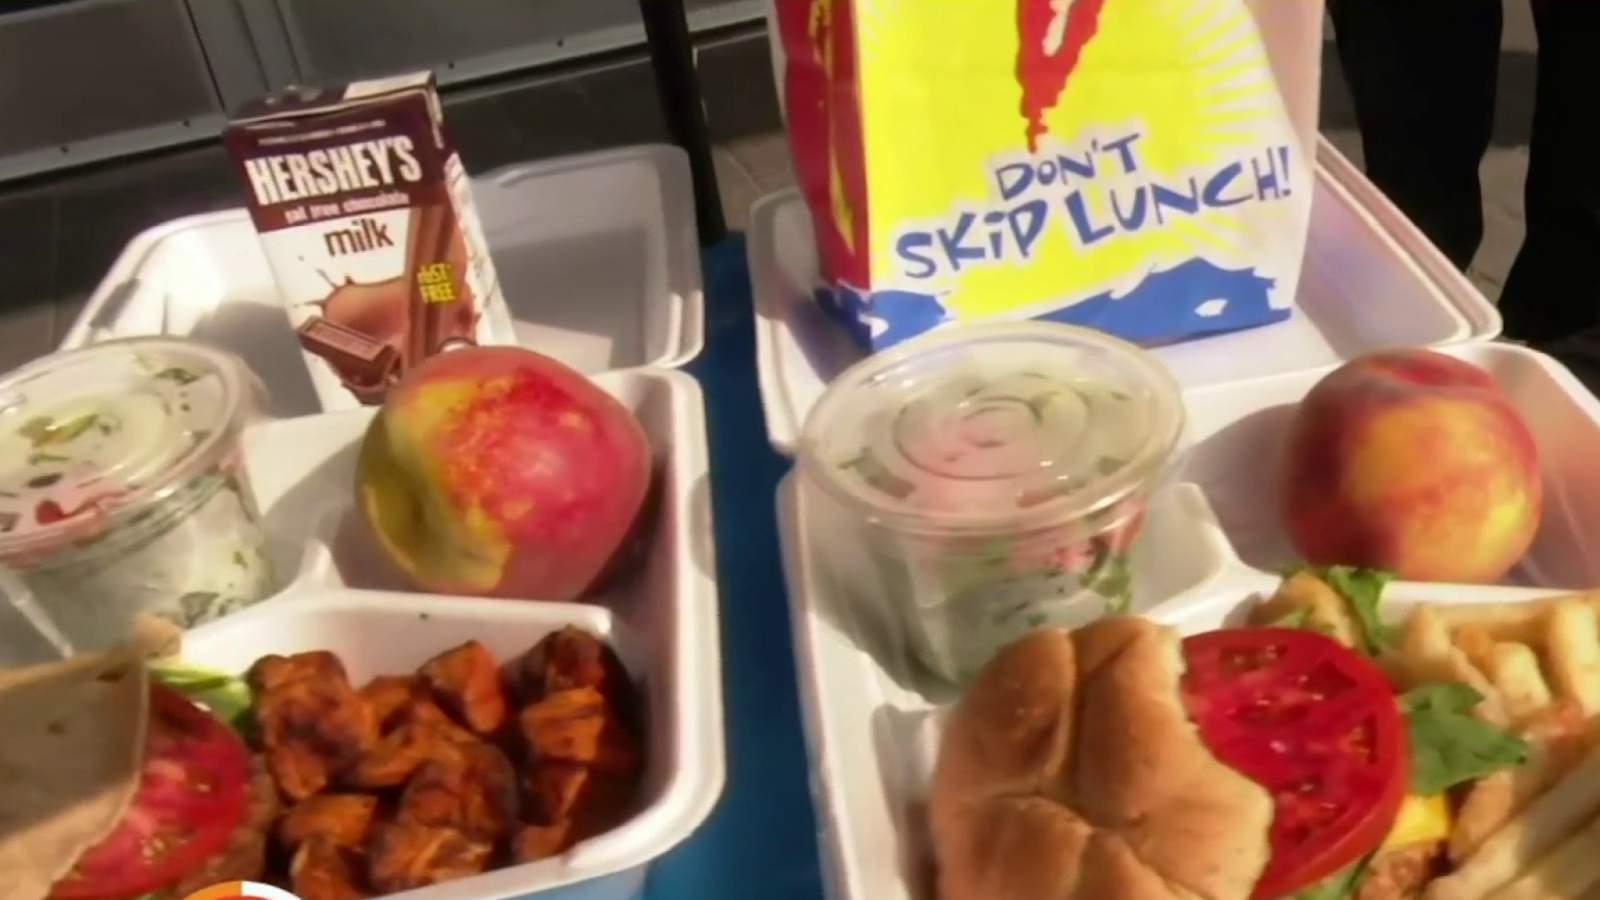 School lunches have stepped up their health game